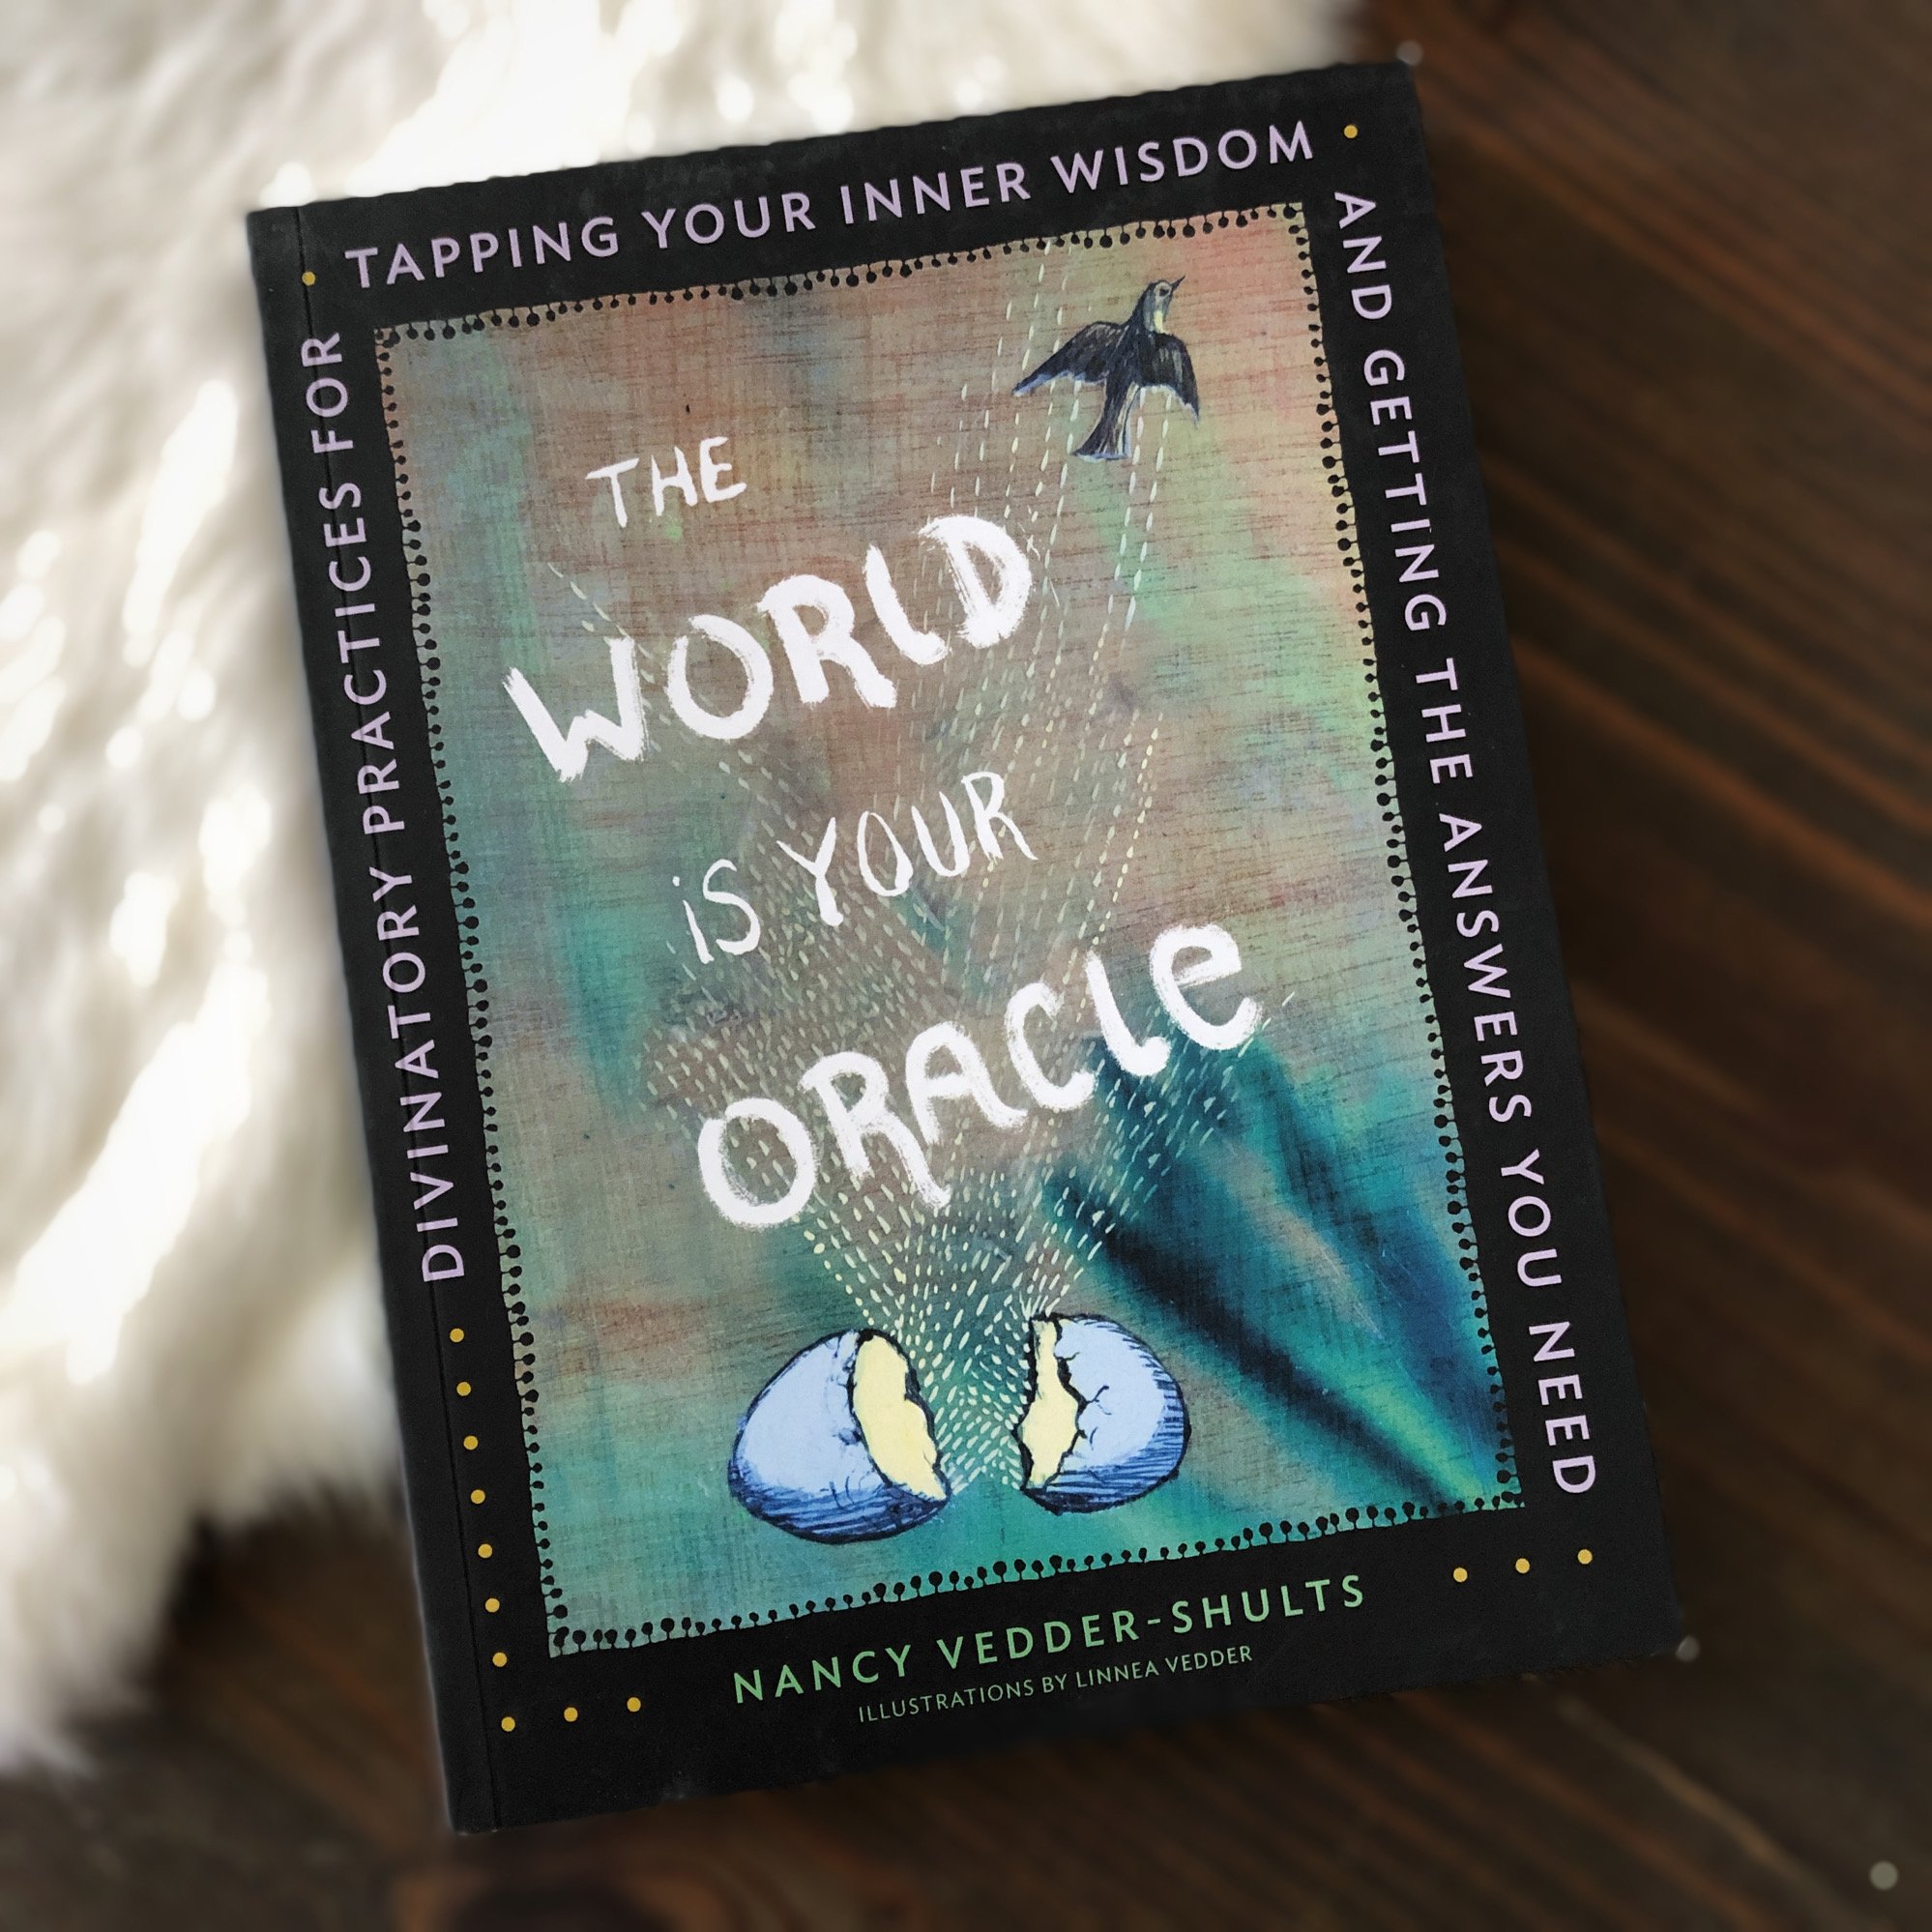 The World is Your Oracle